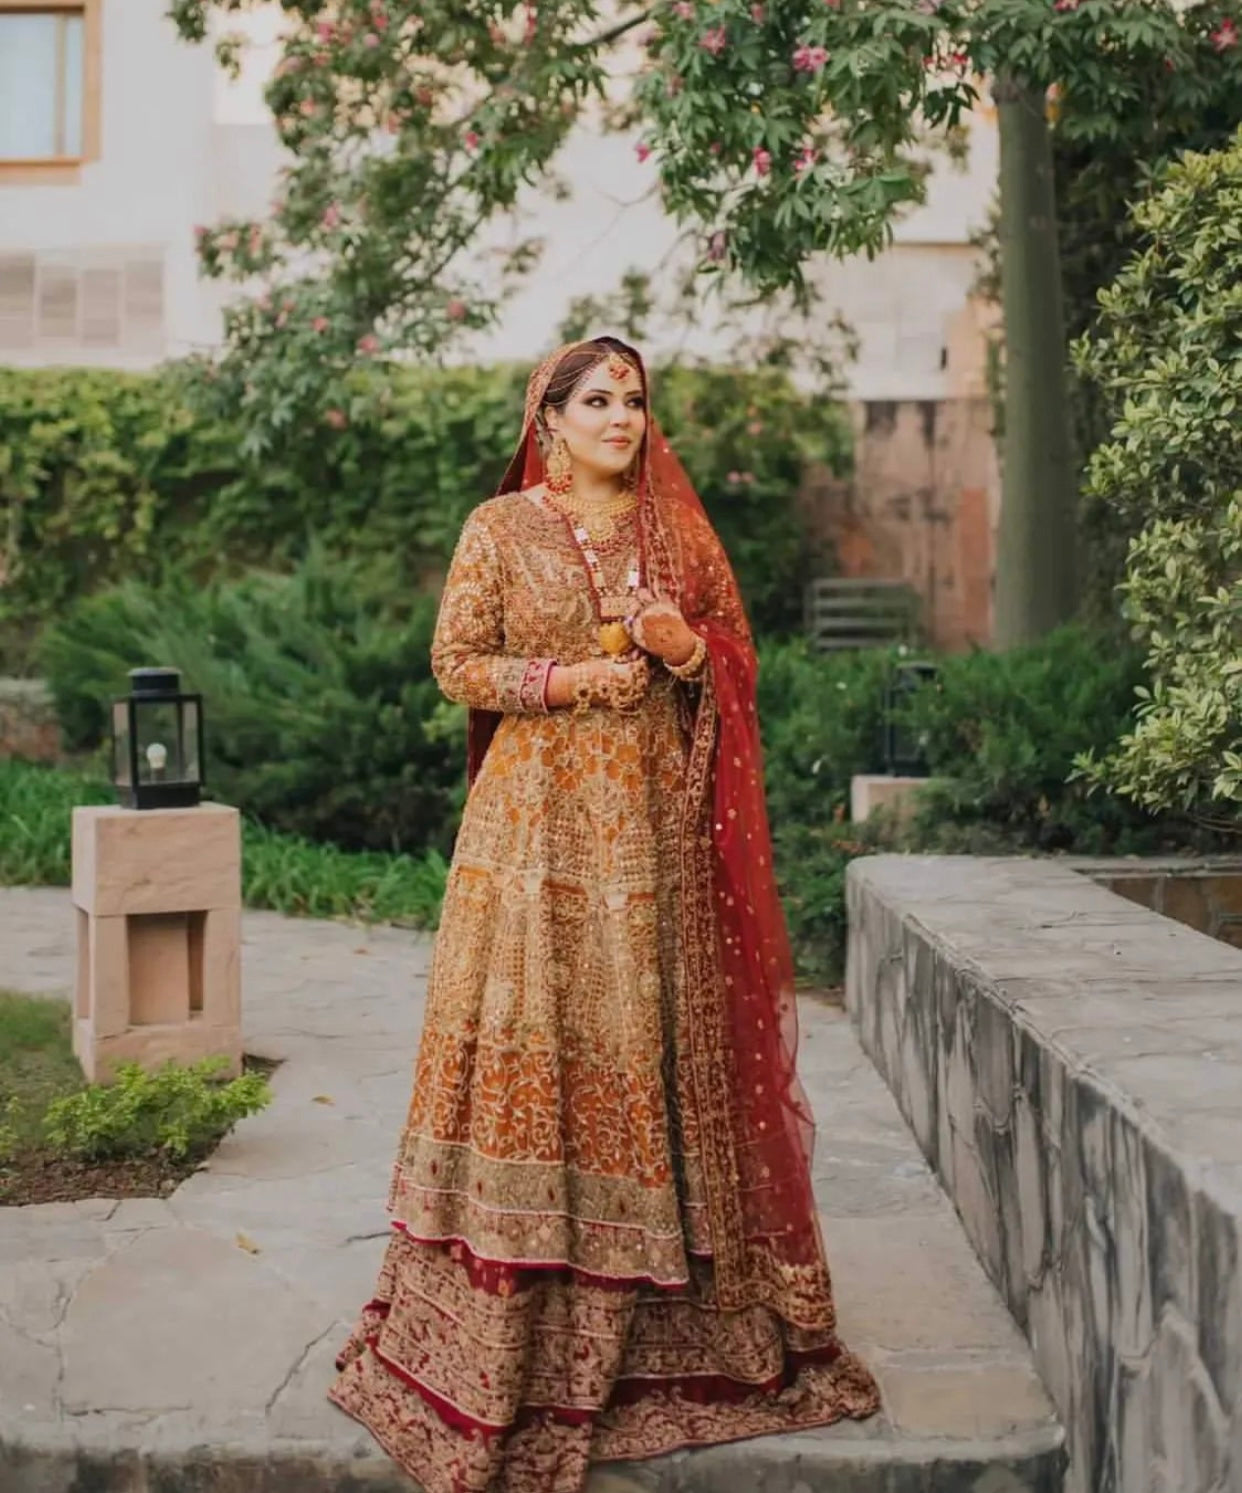 HSY Bridal dresses from Pakistan